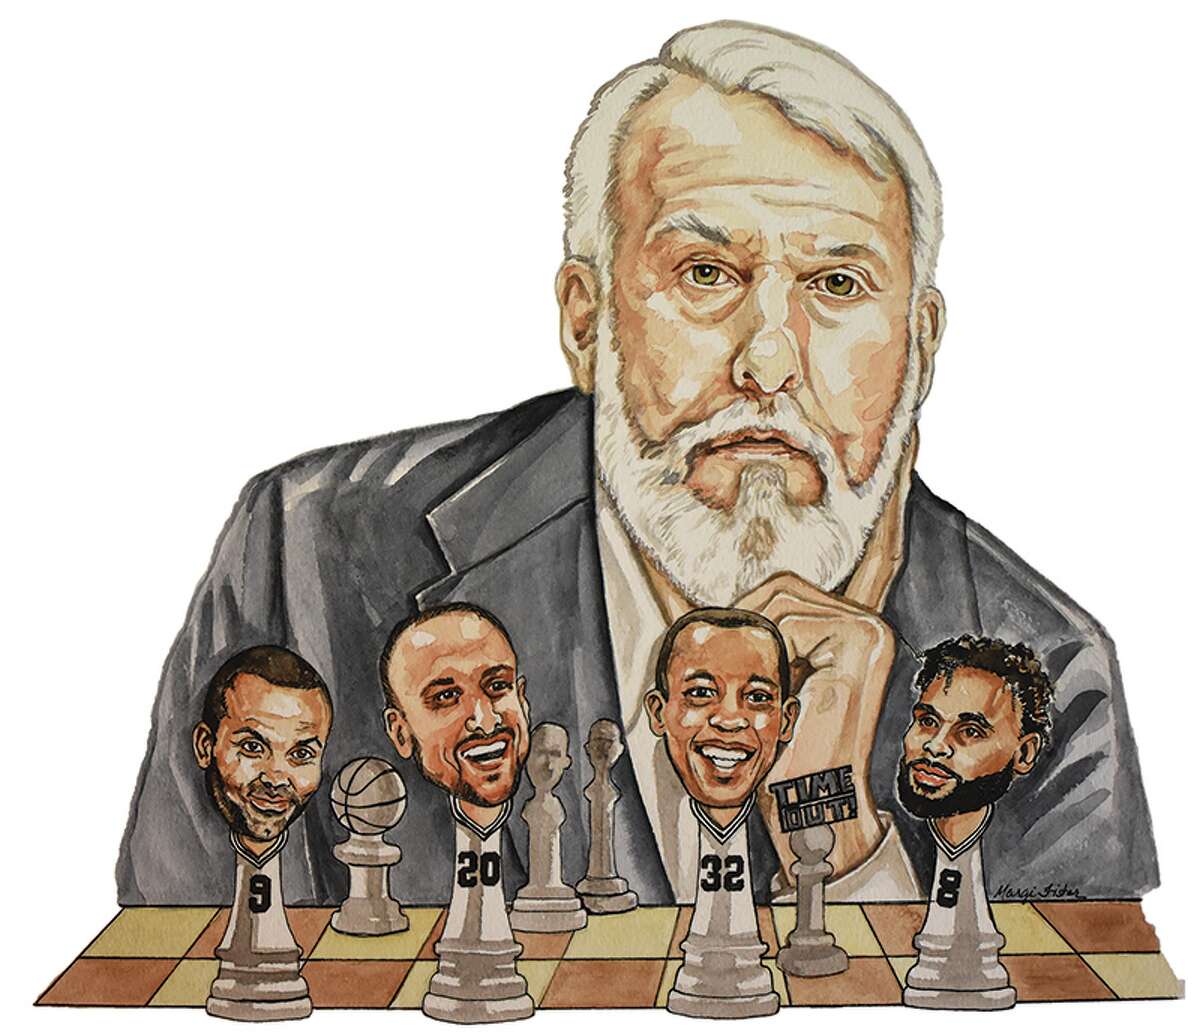 Artwork done by Margie Fisher of Spurs head coach Gregg Popovich and some of his players.